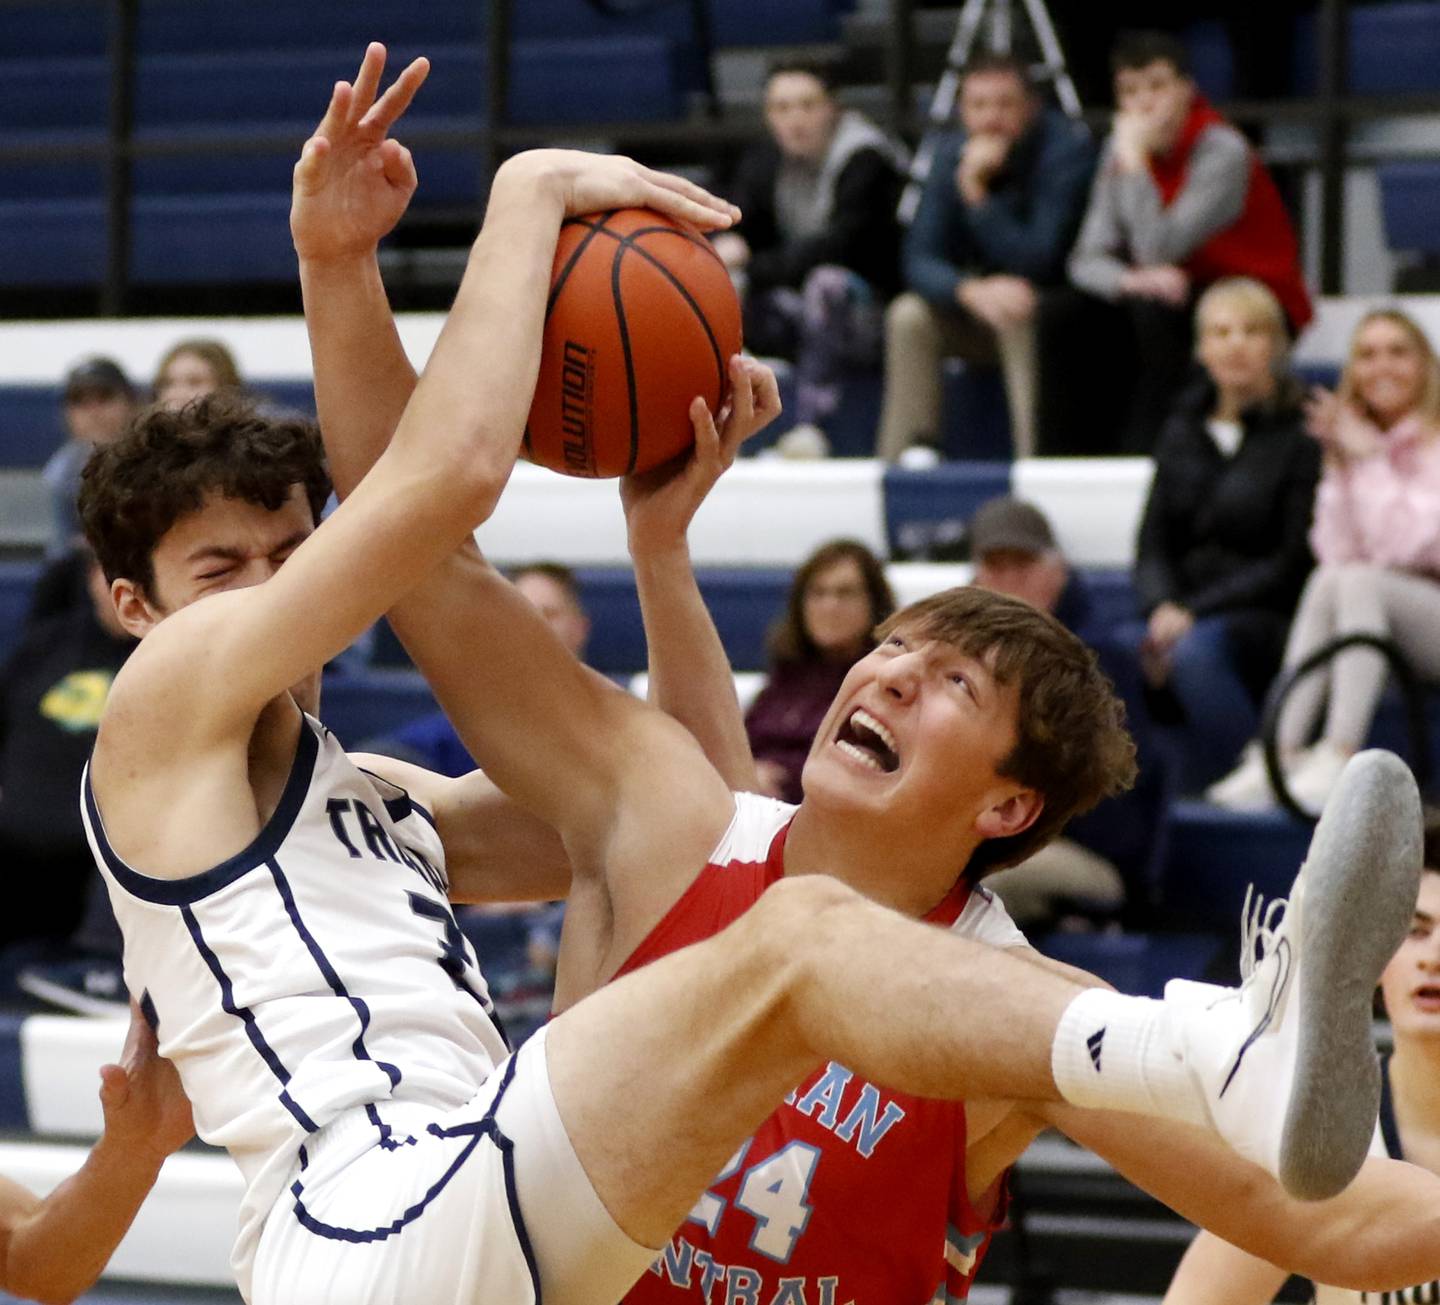 Cary-Grove's Zach Bauer bottles with Marian Central's Christian Bentancur for a rebound during a non-conference basketball game Monday, Dec.19, 2022, at Cary-Grove High School in Cary.